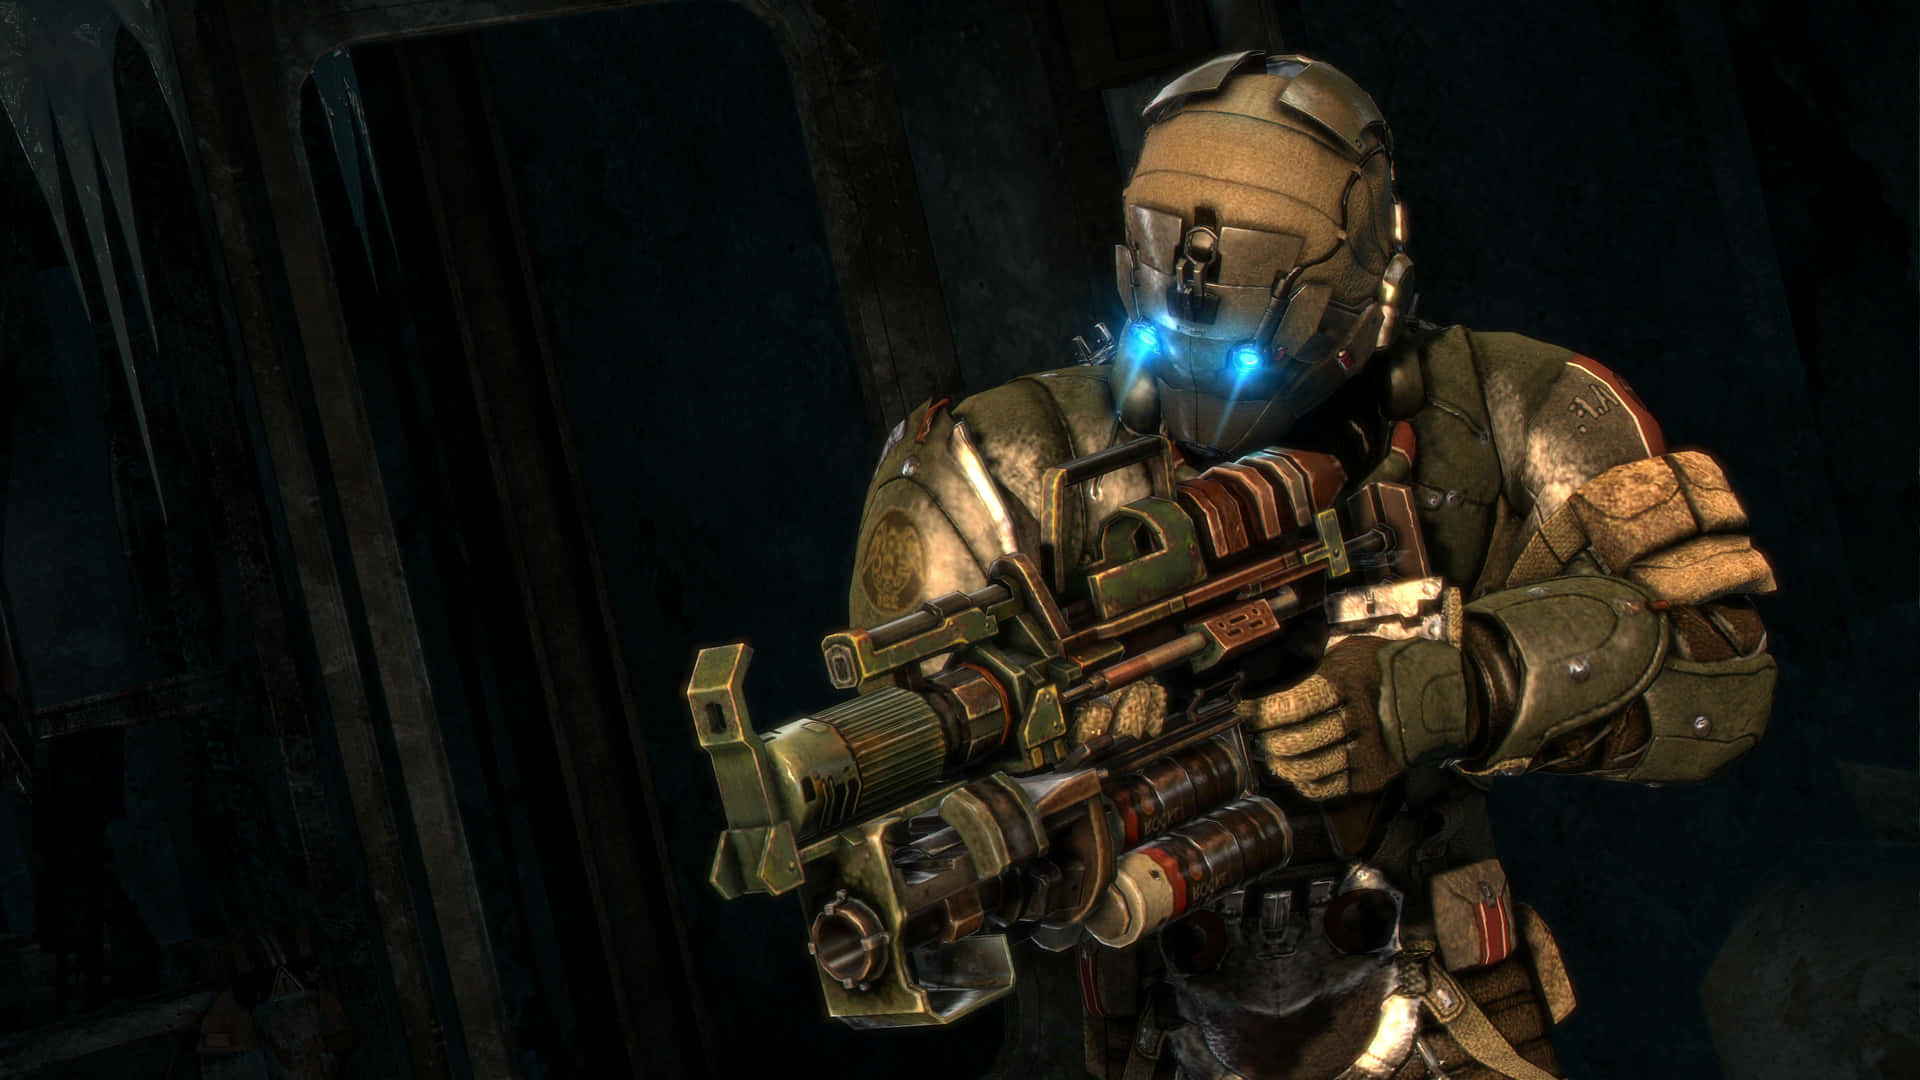 Dead Space Holding Weapons 4k Wallpaper